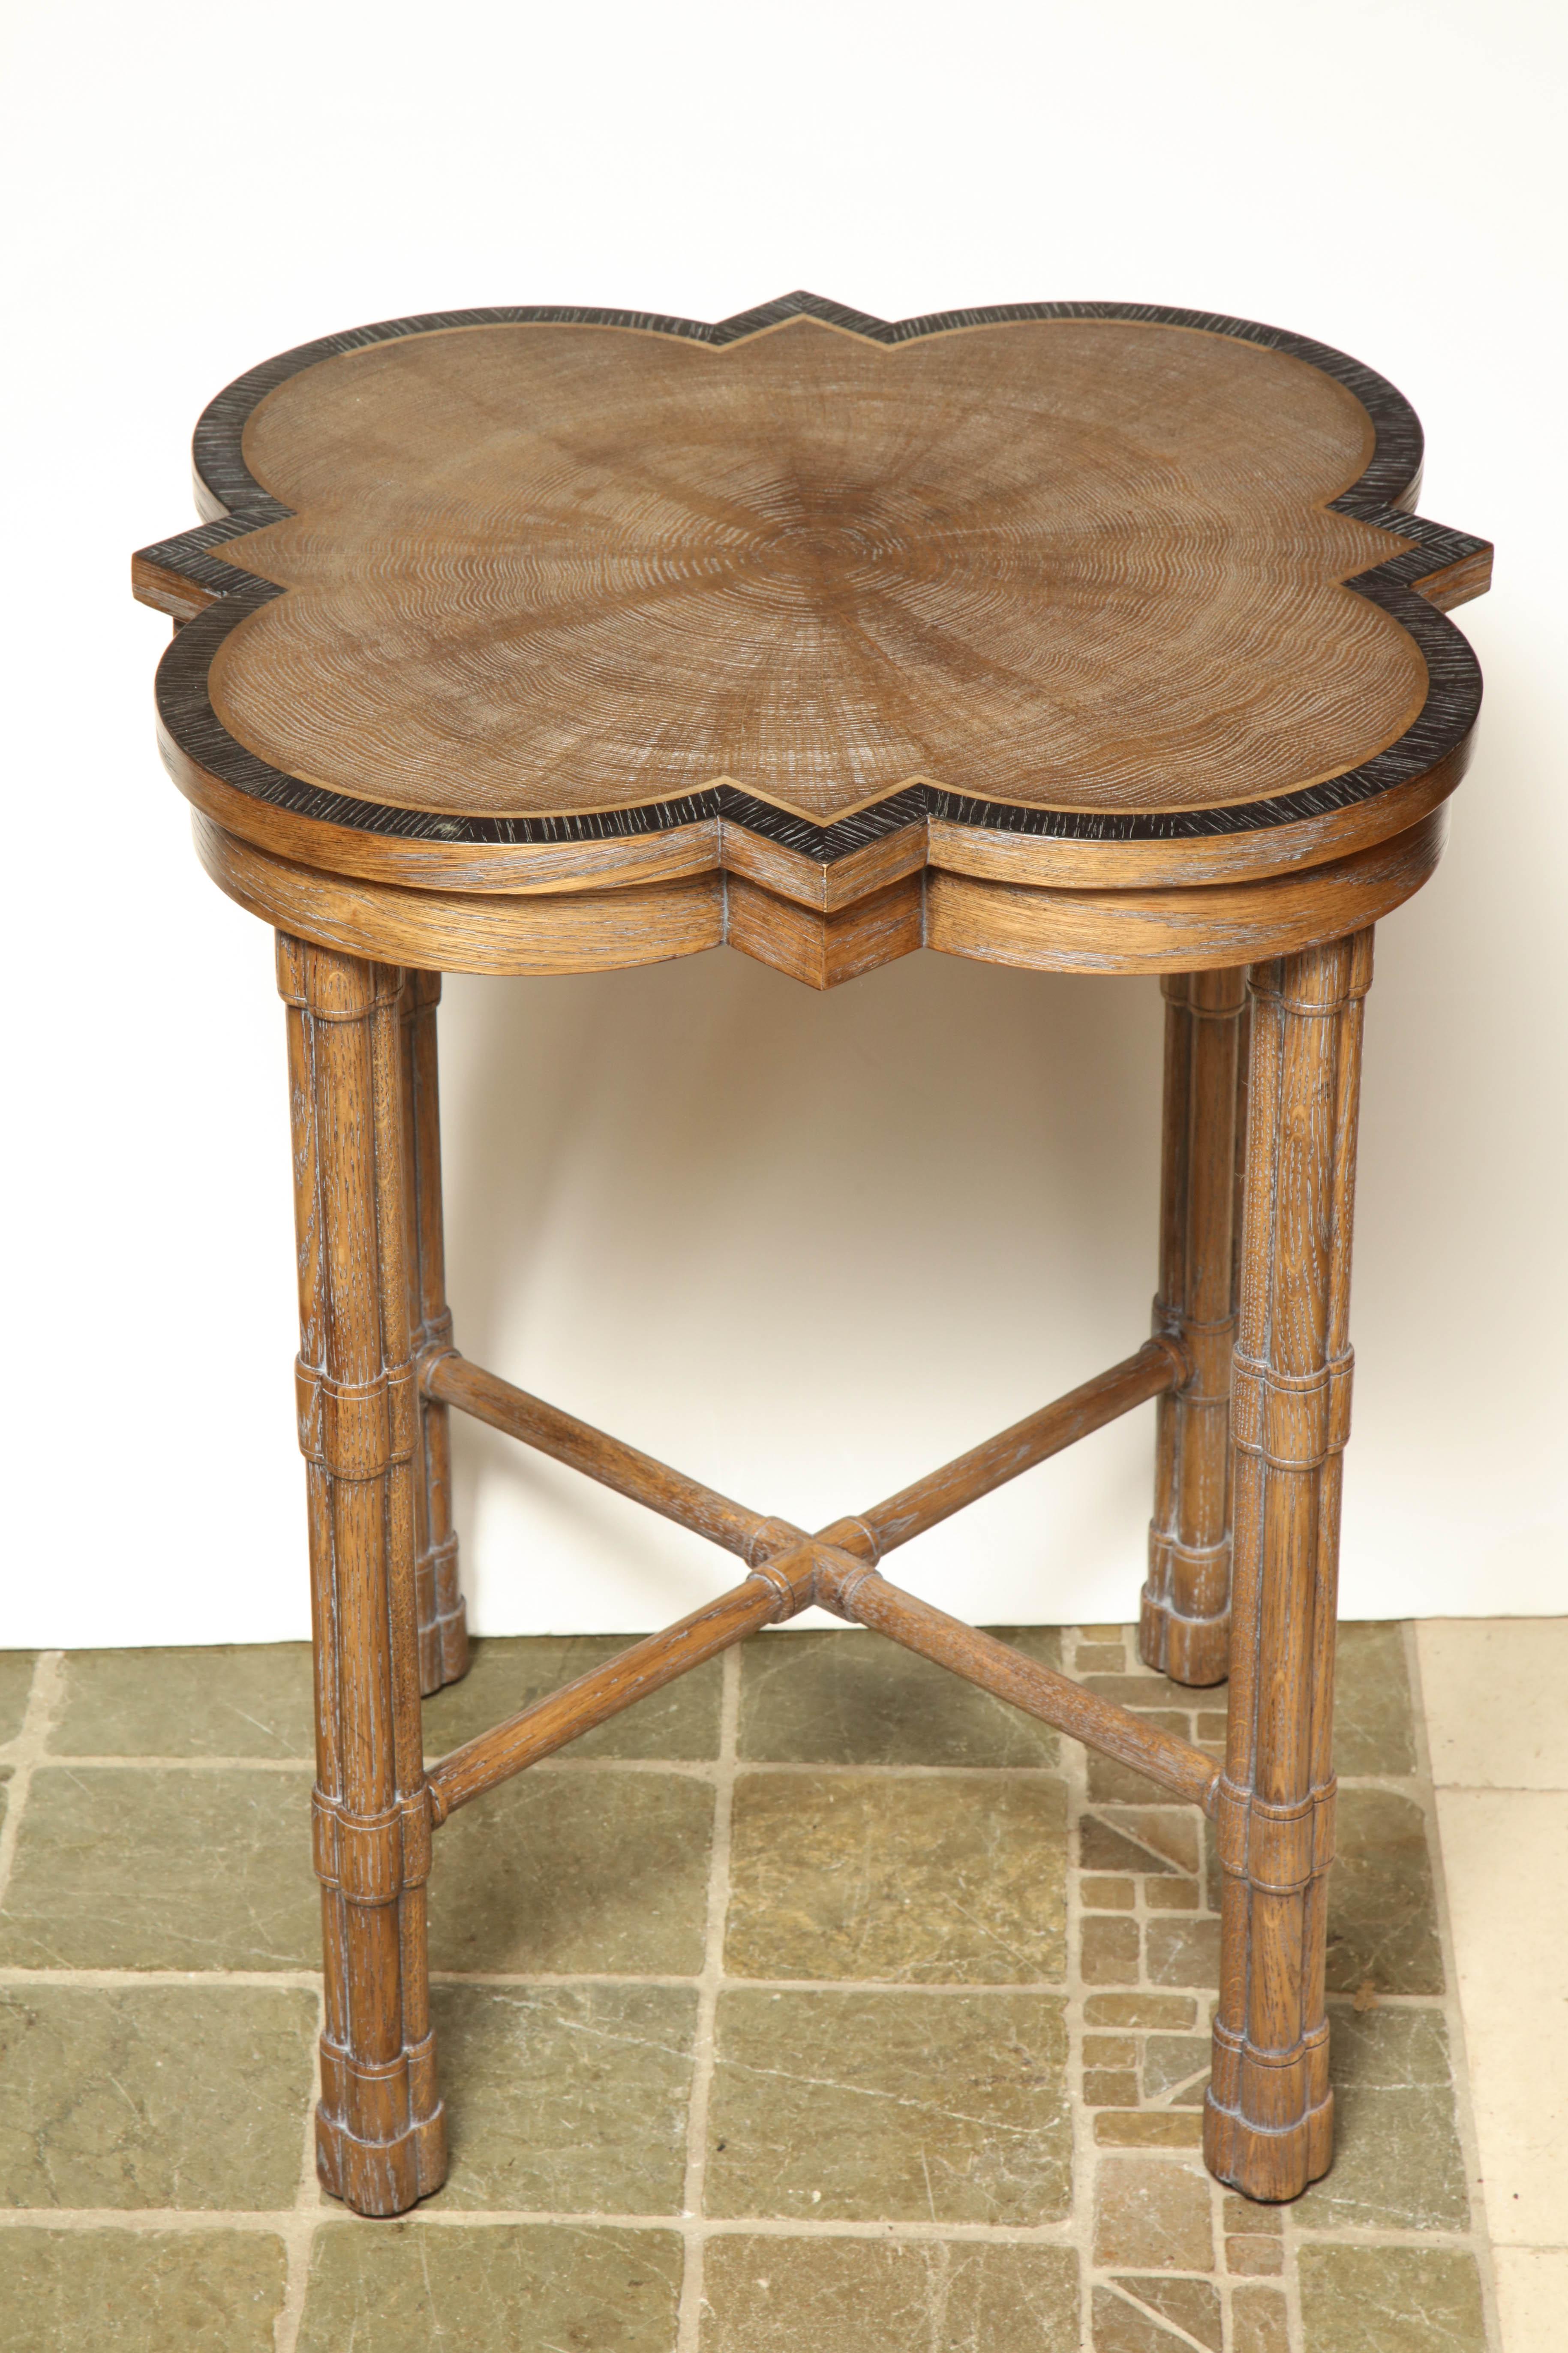 Pair of transitional English heart oak veneered side tables in the George II taste, with crossbanded tops on cluster column legs with an X stretcher.